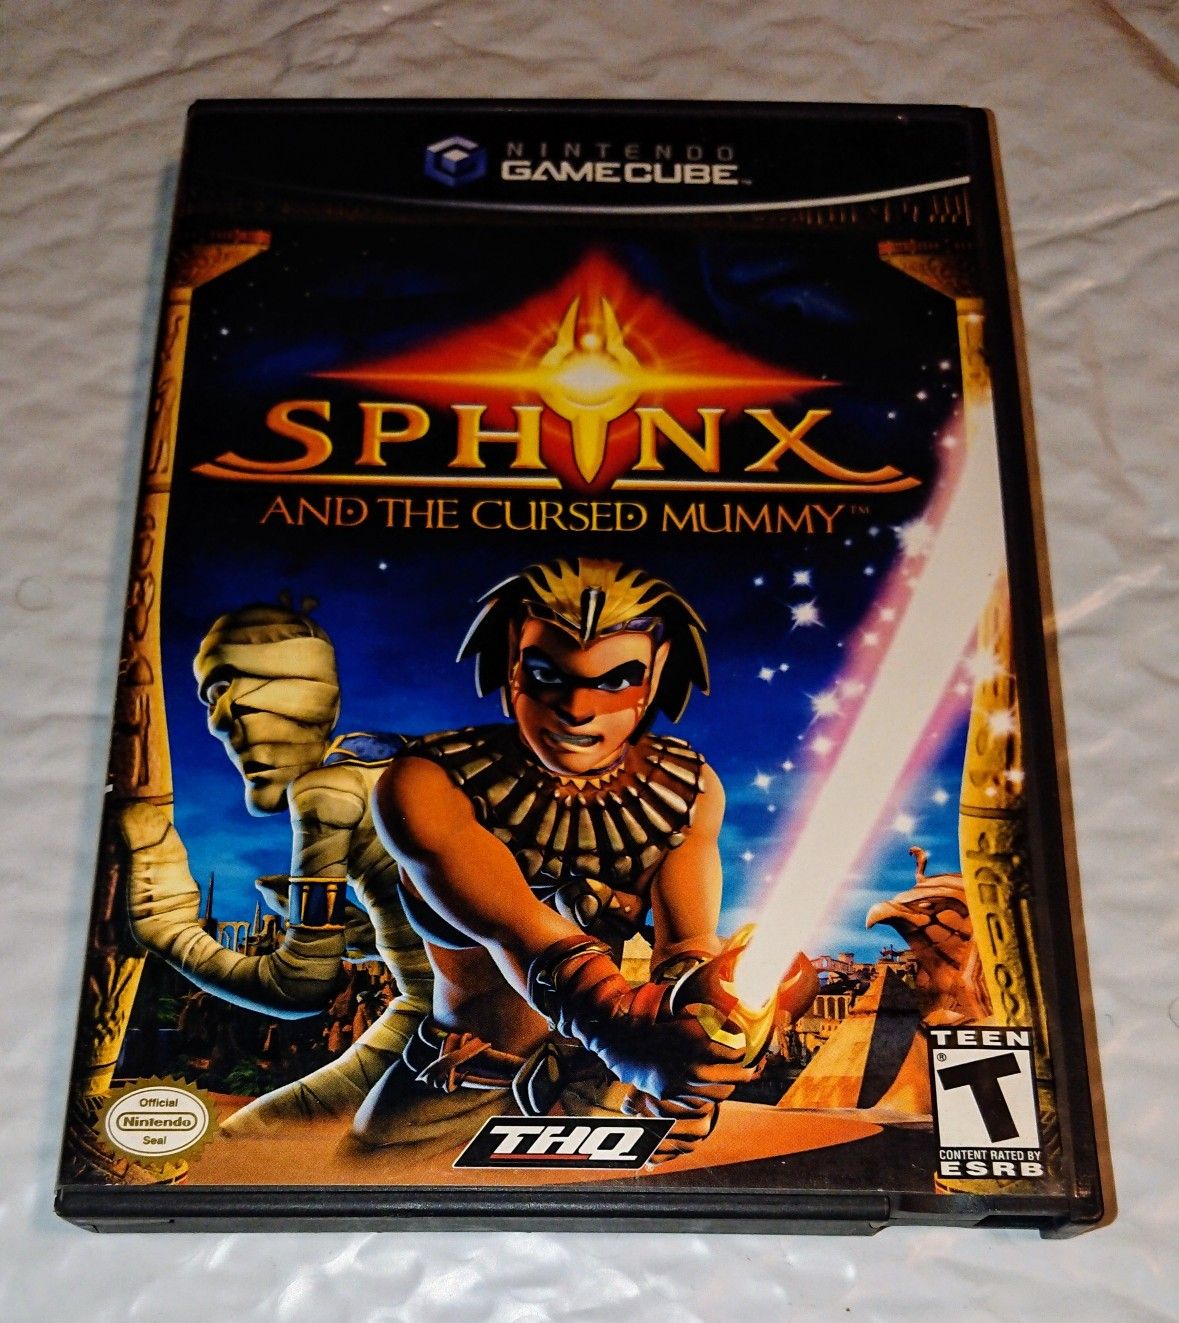 Sphinx and the Cursed Mummy GameCube game